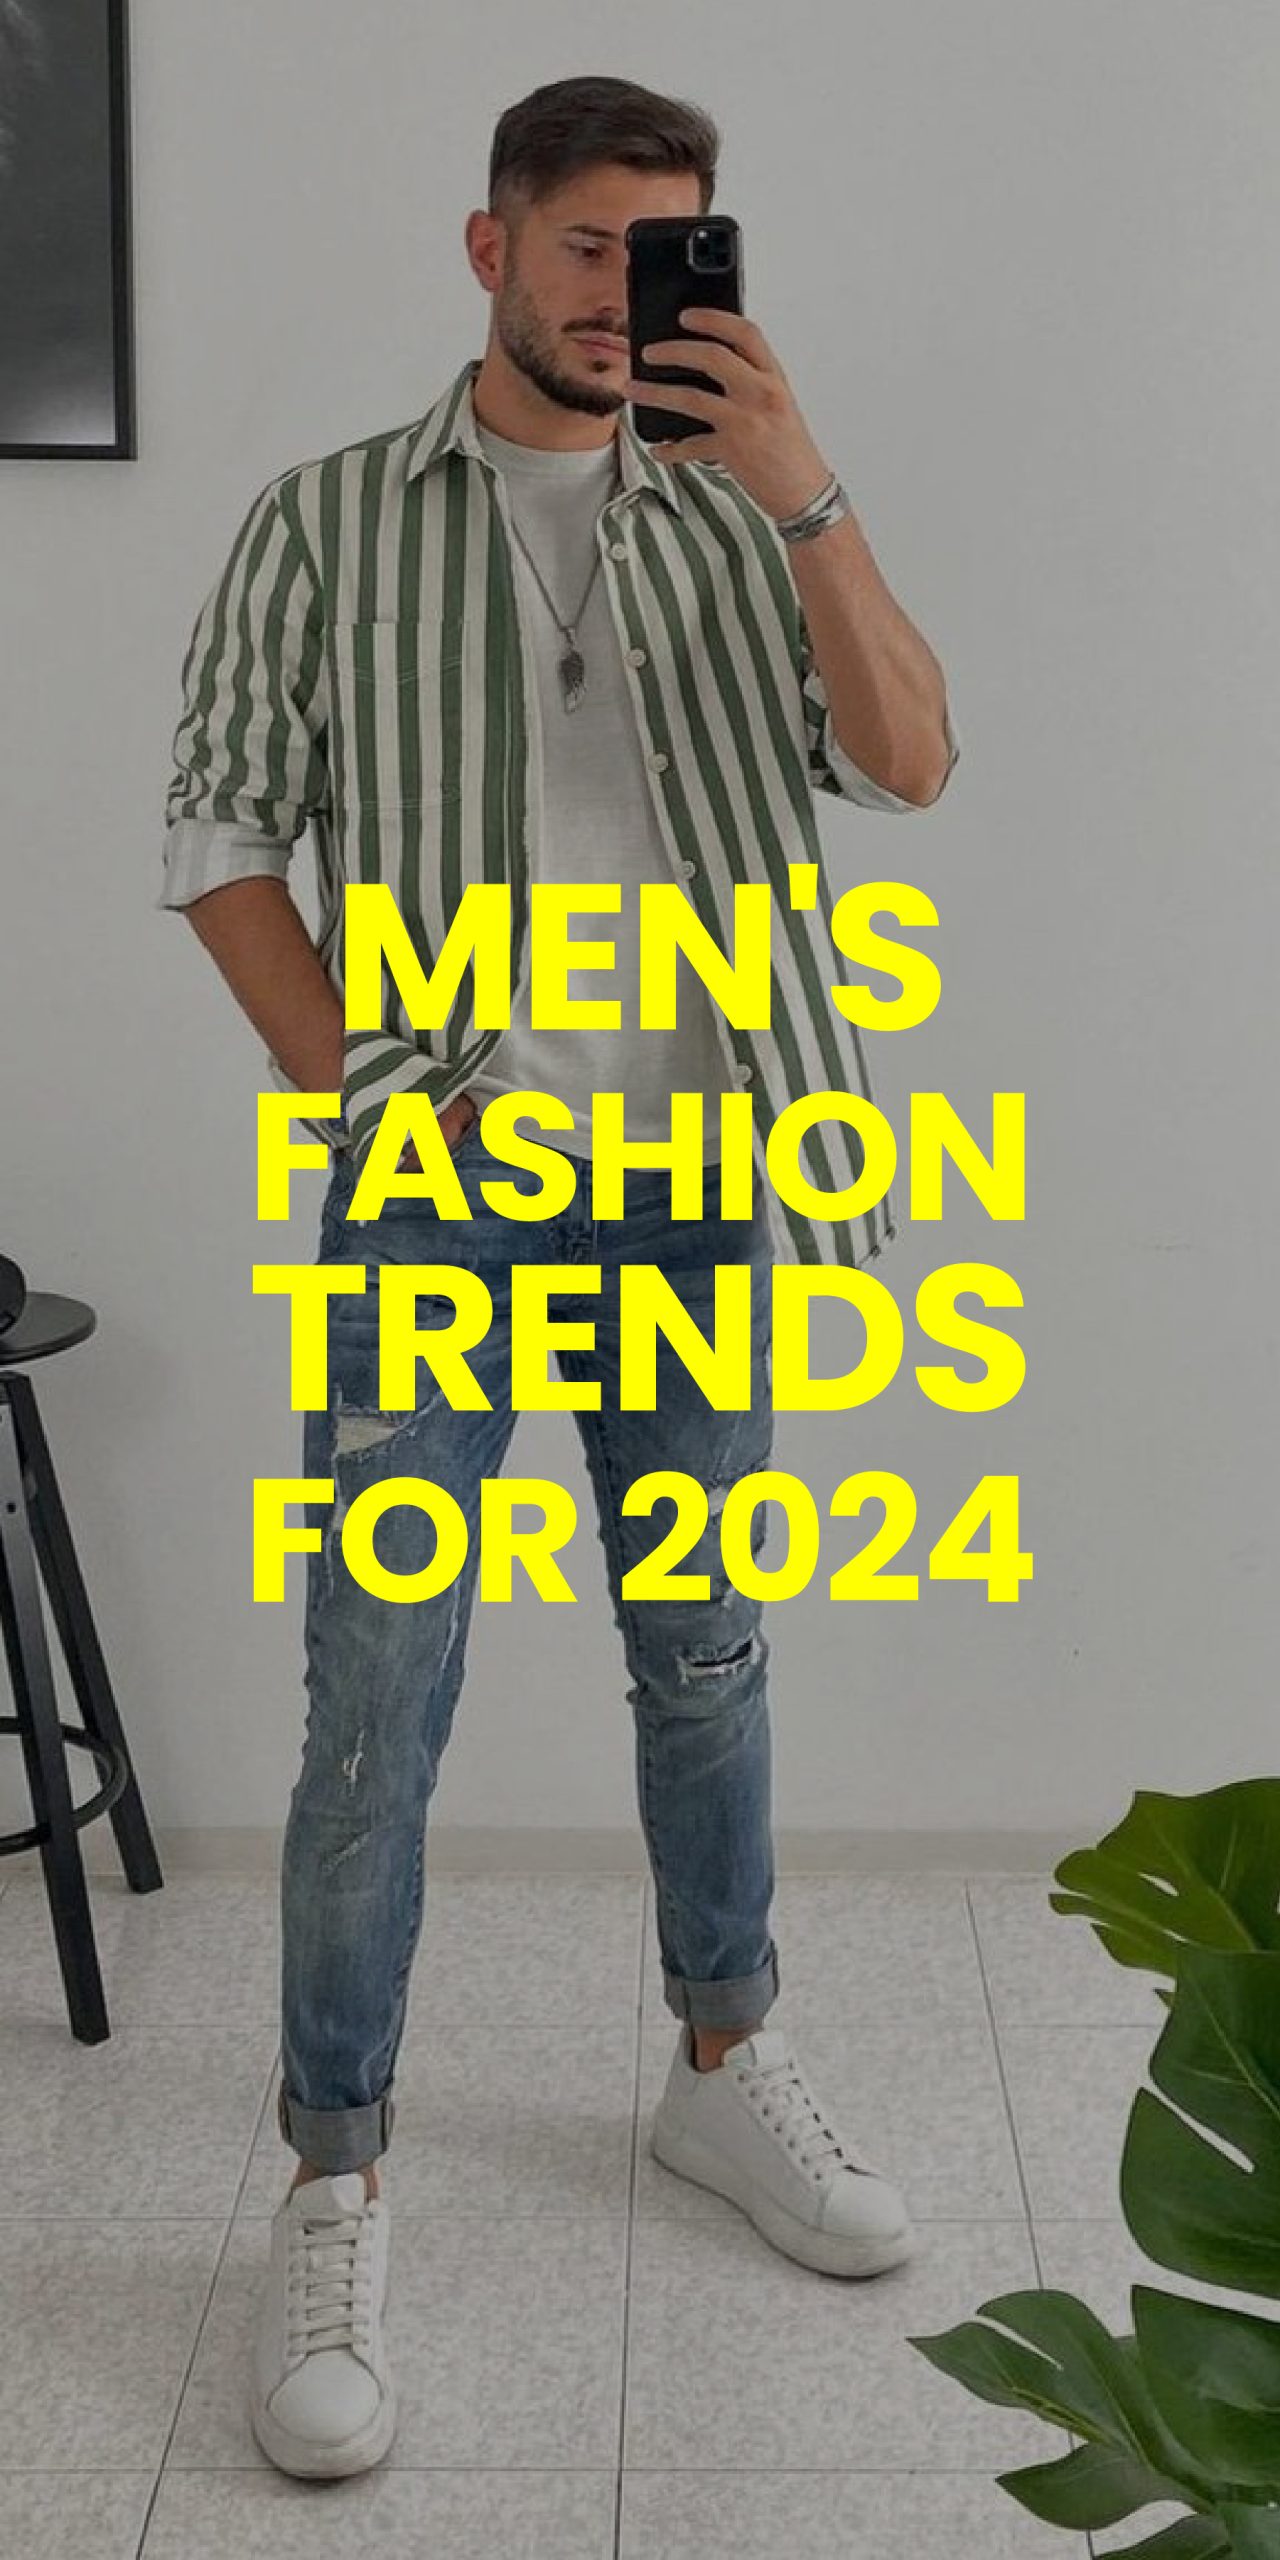 MEN’S FASHION TRENDS FOR 2024